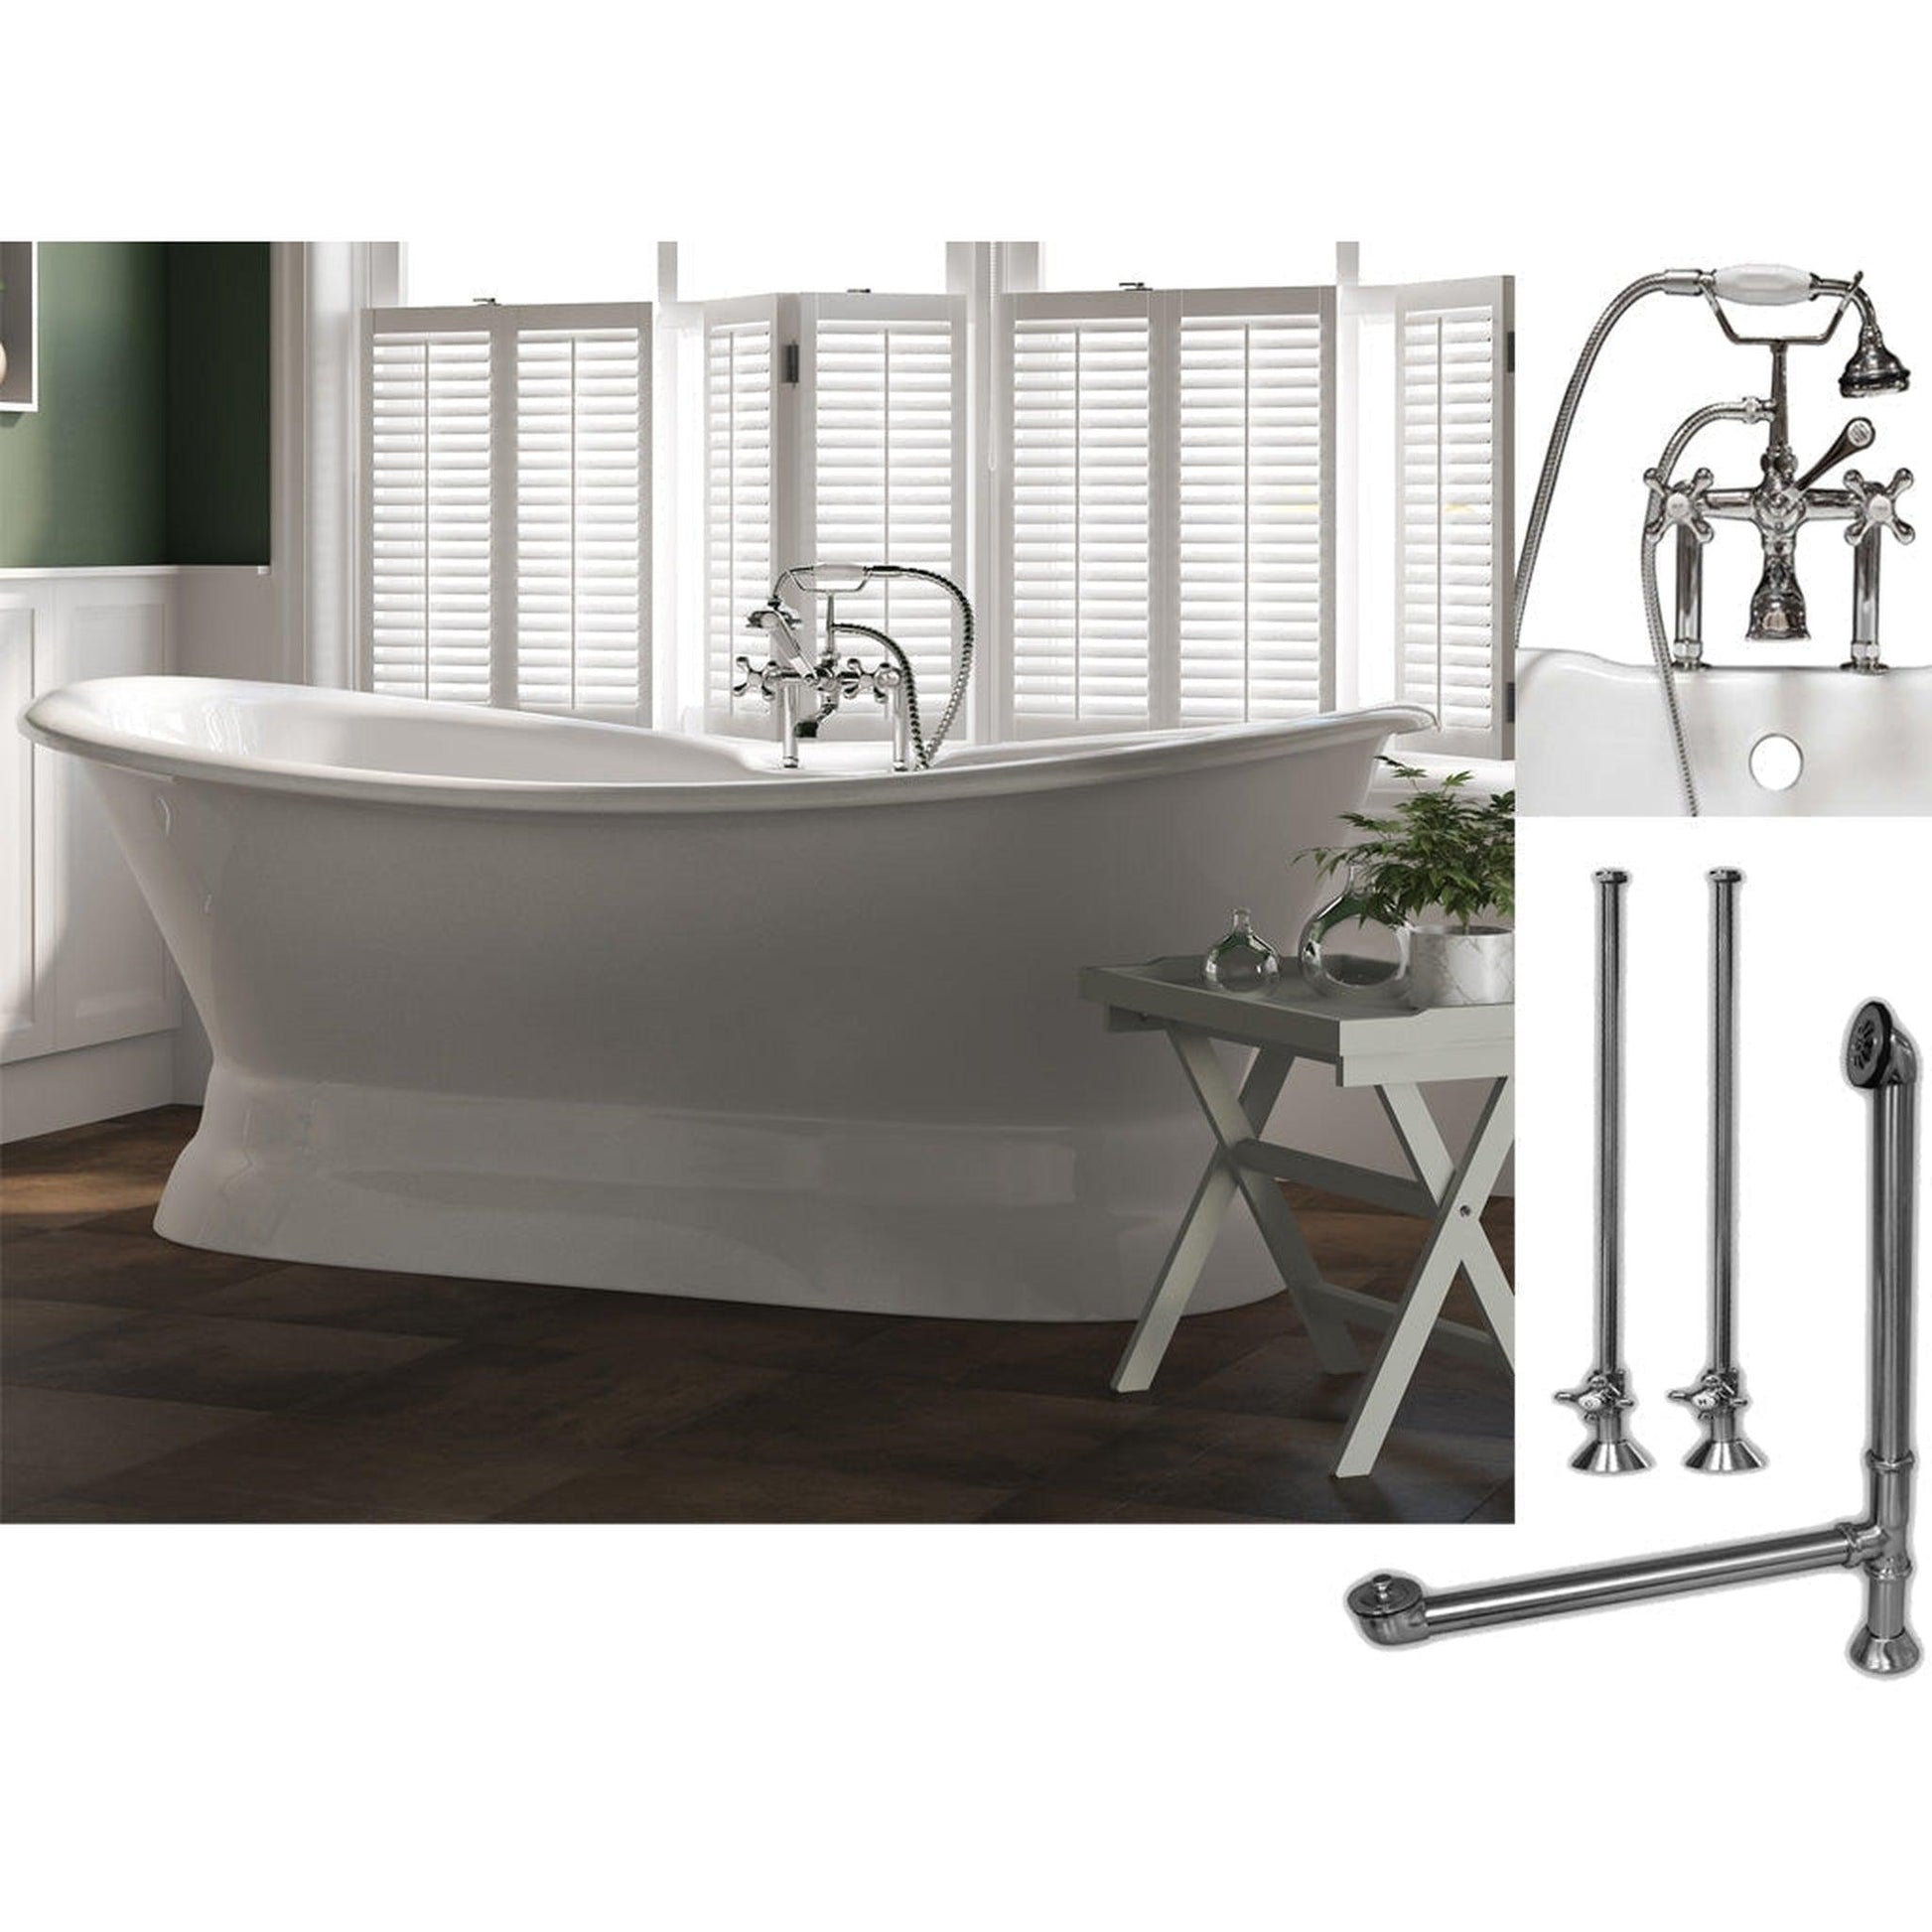 Cambridge Plumbing 71" White Cast Iron Double Slipper Pedestal Bathtub With Deck Holes And Complete Plumbing Package Including 6” Riser Deck Mount Faucet, Supply Lines, Drain And Overflow Assembly In Polished Chrome